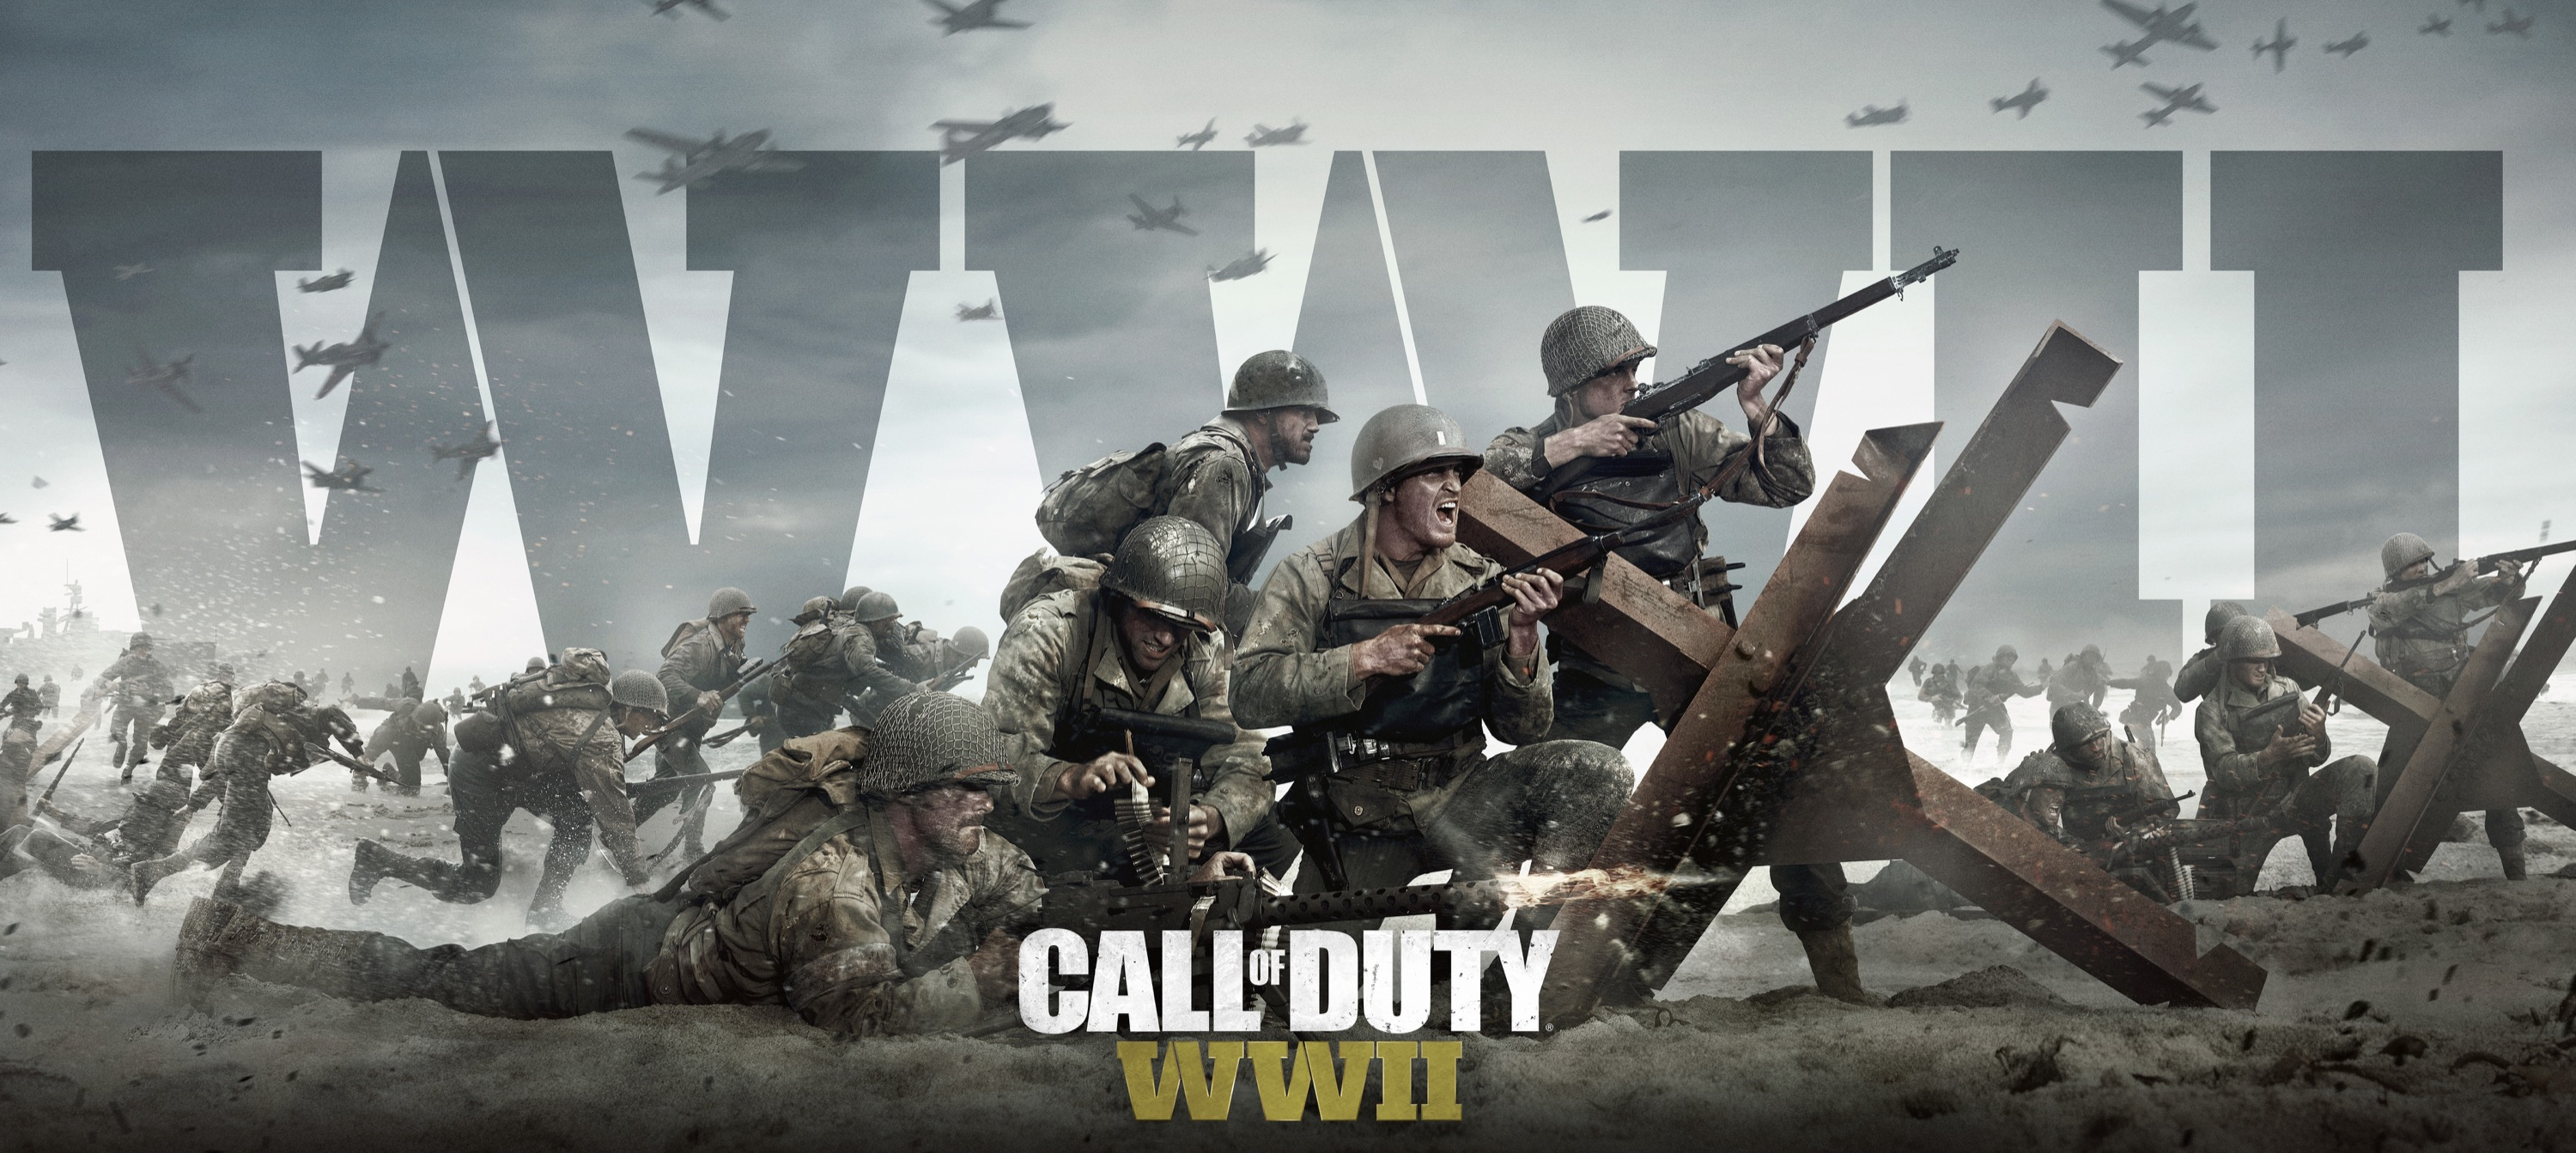 3000x1343 20+ Call of Duty: WWII HD Wallpapers and Backgrounds